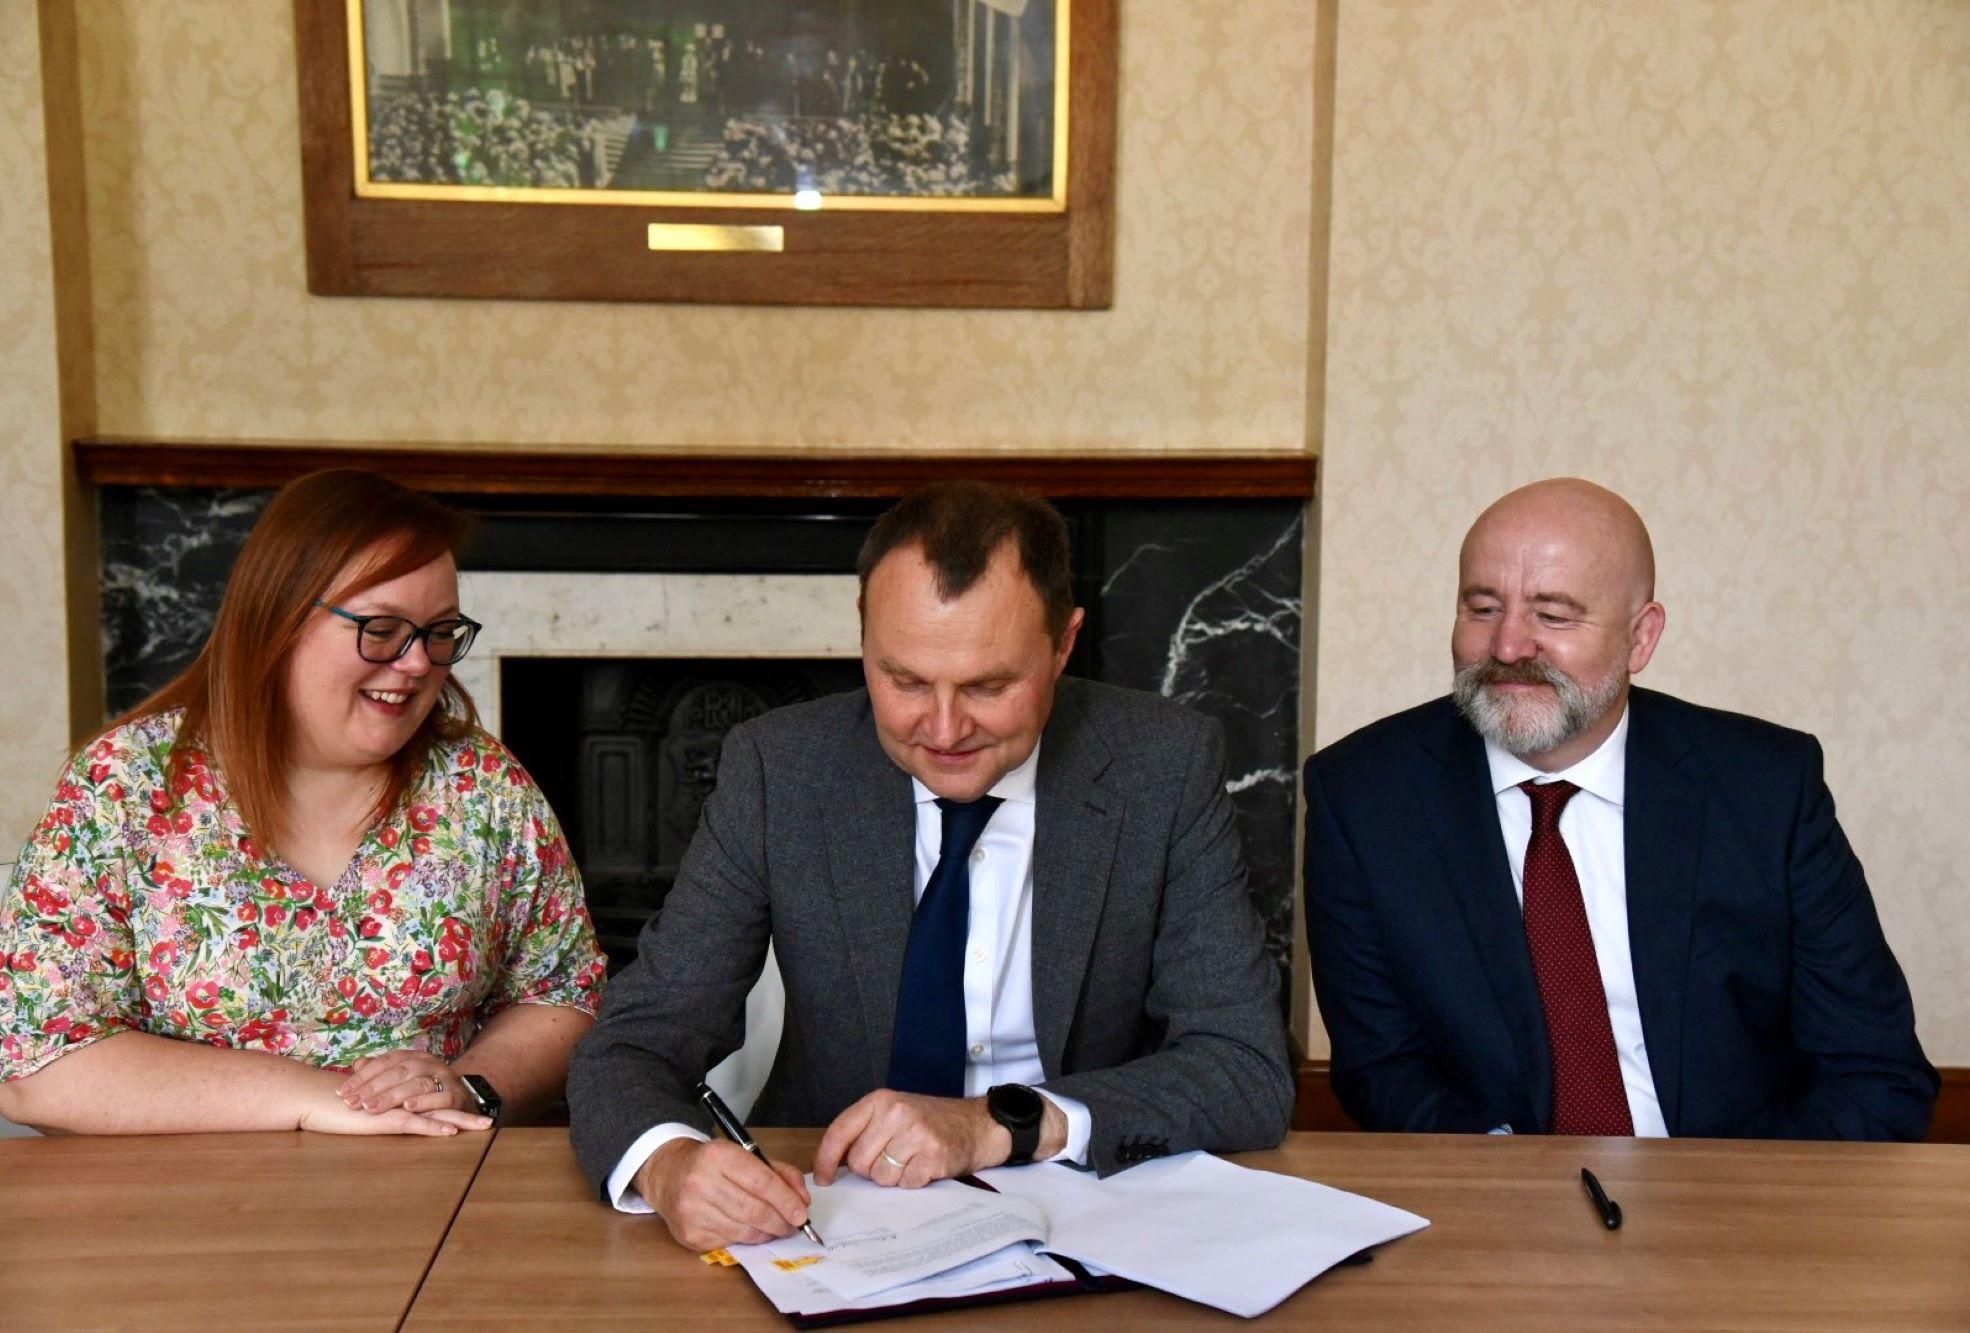 Professor Adam Tickell, Vice-Chancellor of the University of Birmingham, signs the agreement with IIT Madras, watched by TNE Officer Rachel du Croz and Mark Lee, Professor of Artificial Intelligence.